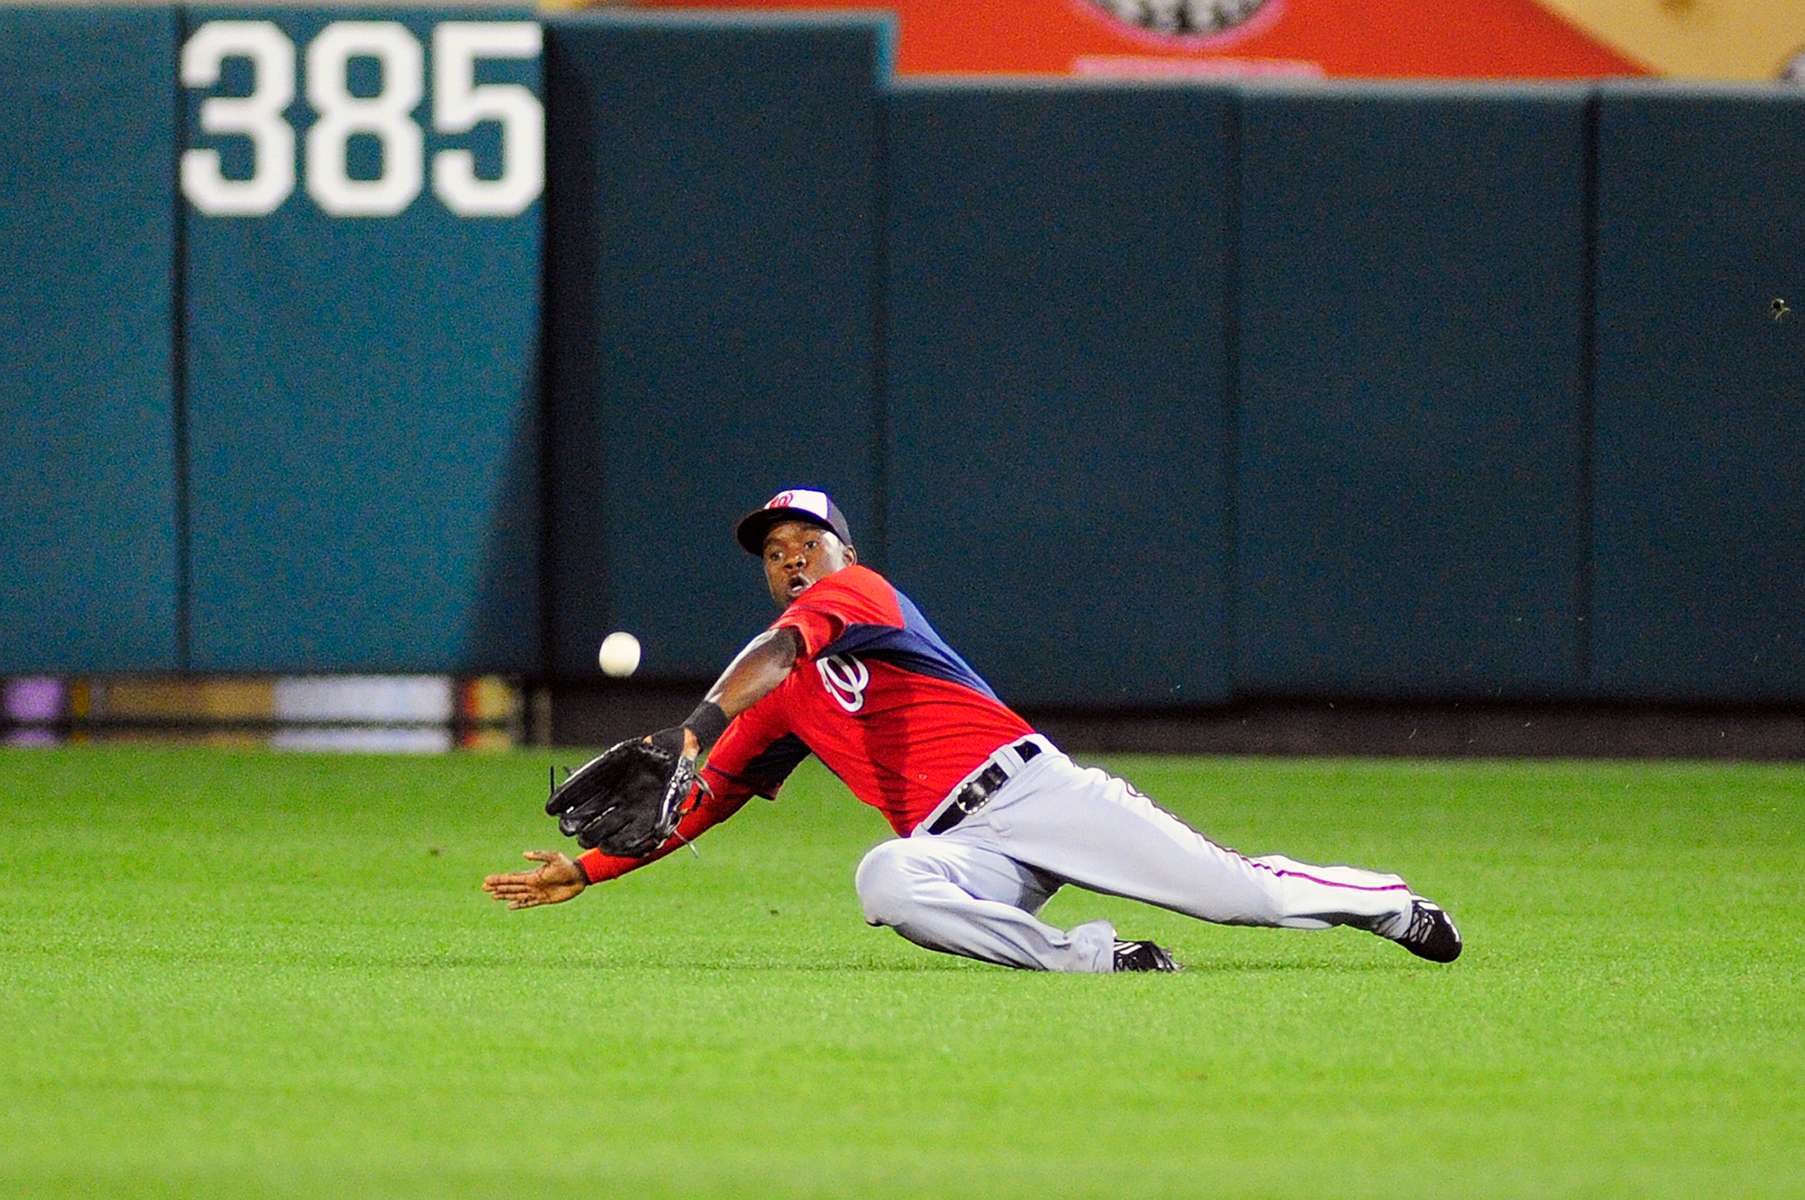 Washington Nationals center fielder Eury Perez (3) dives to try and make a catch in the sixth inning as the Atlanta Braves beat the Washington Nationals 3-2 on Wednesday March 6, 2014 at Champion Stadium in Lake Buena Vista, Fla.